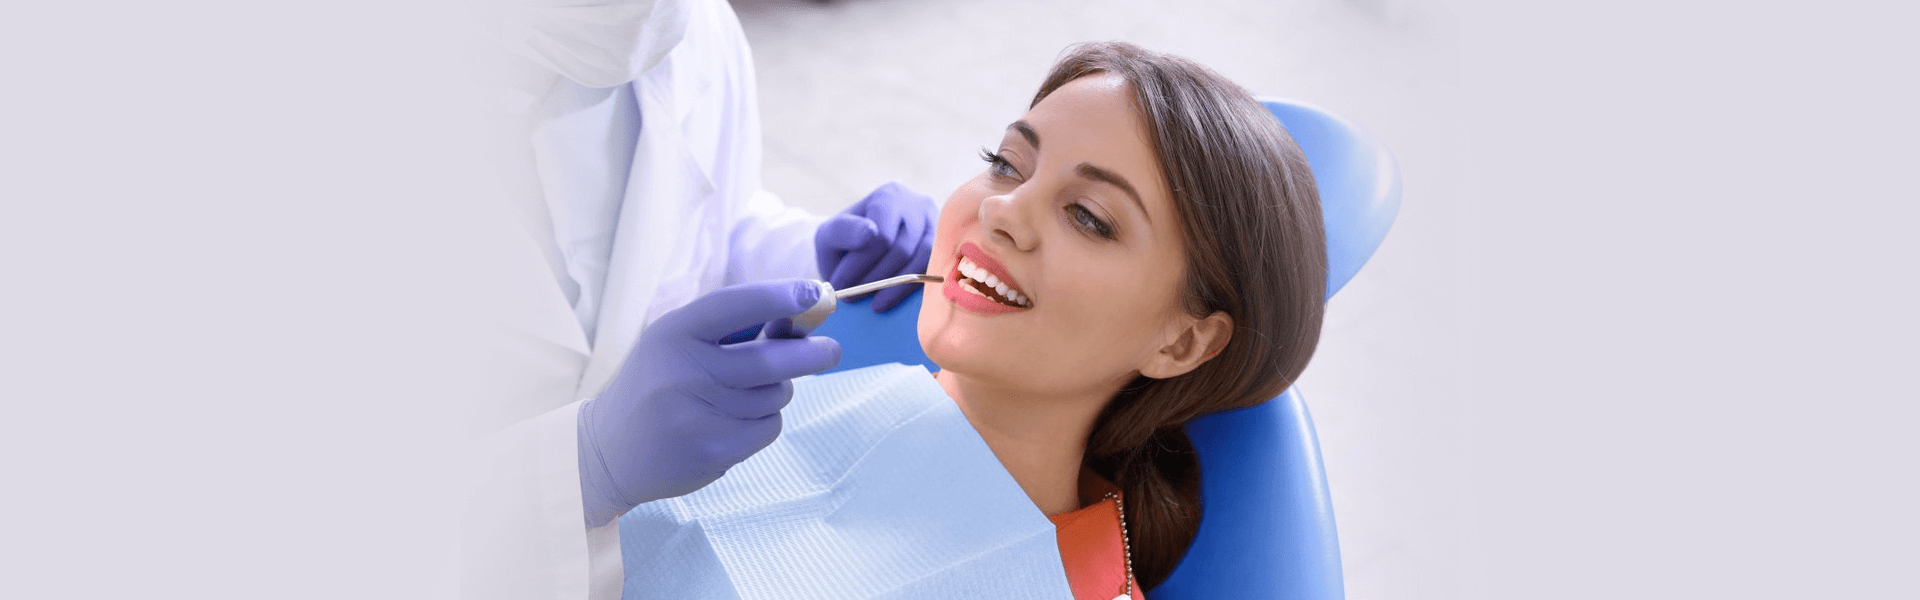 Your Oral Health Says a Lot About Your Health